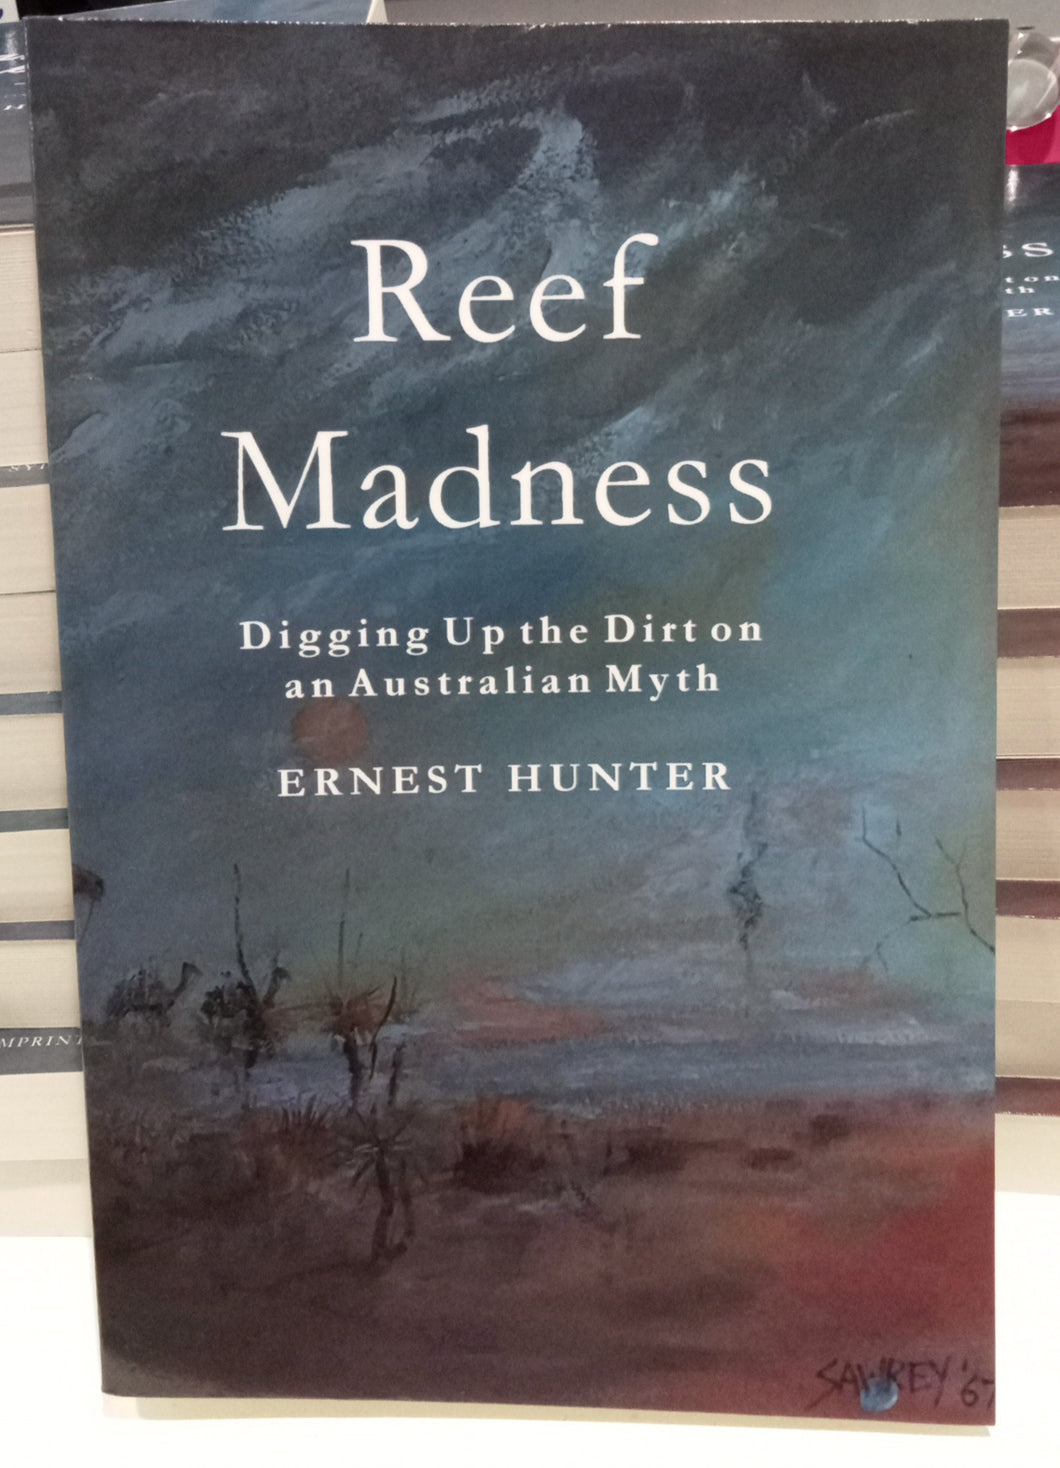 Book - Reef Madness